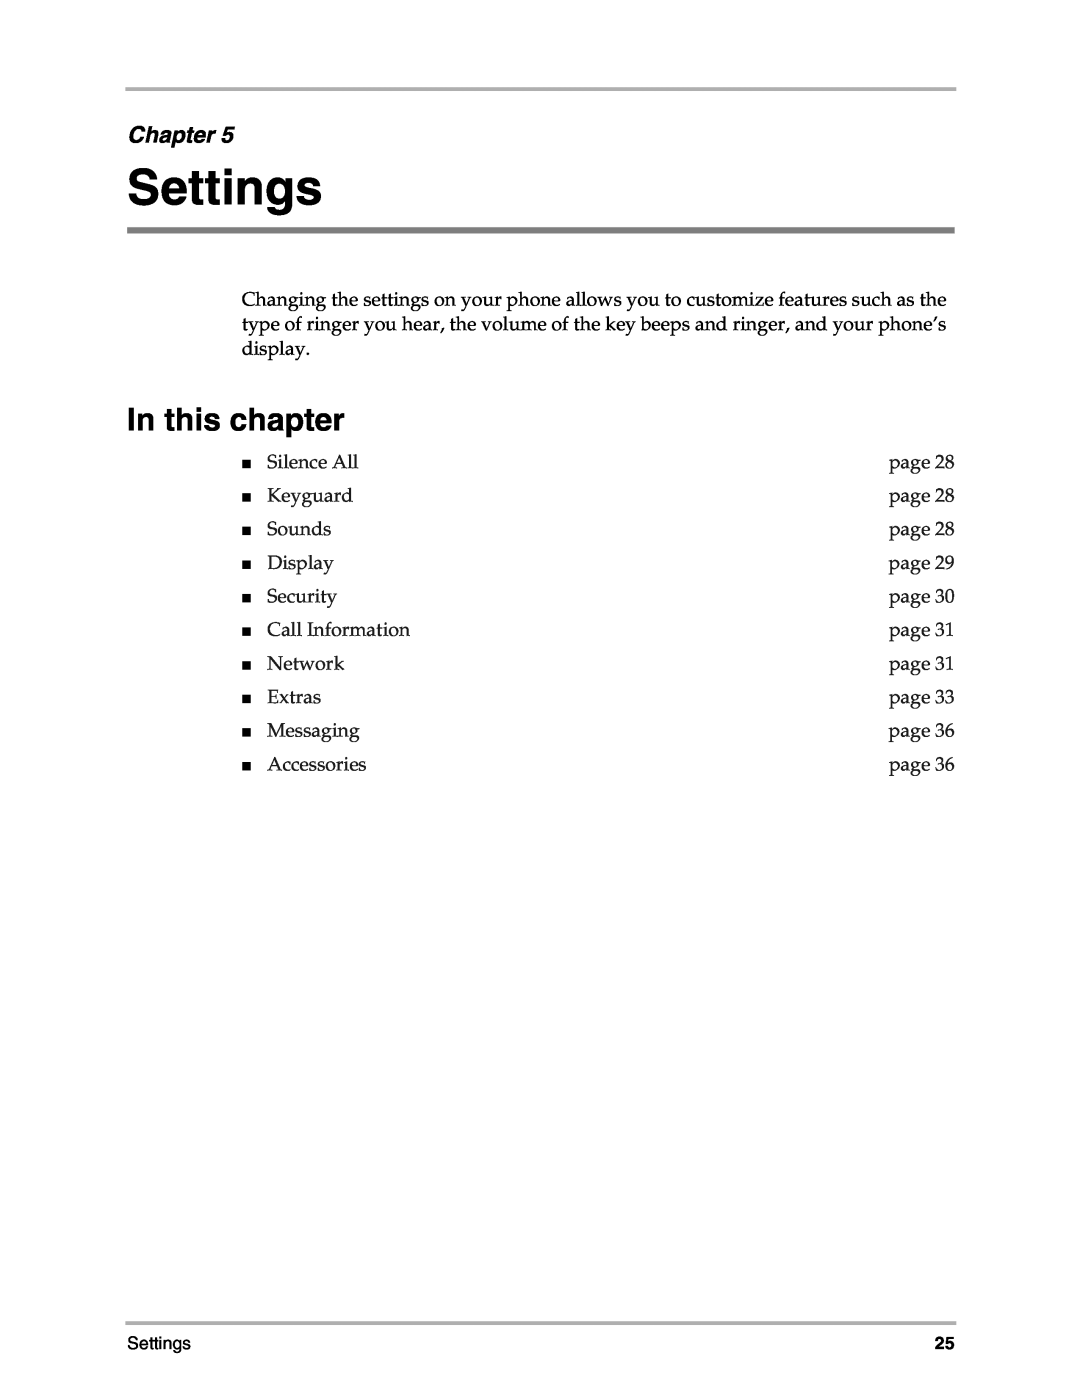 Kyocera 3035 Settings, In this chapter, Chapter, Silence All, page, Keyguard, Sounds, Display, Security, Call Information 